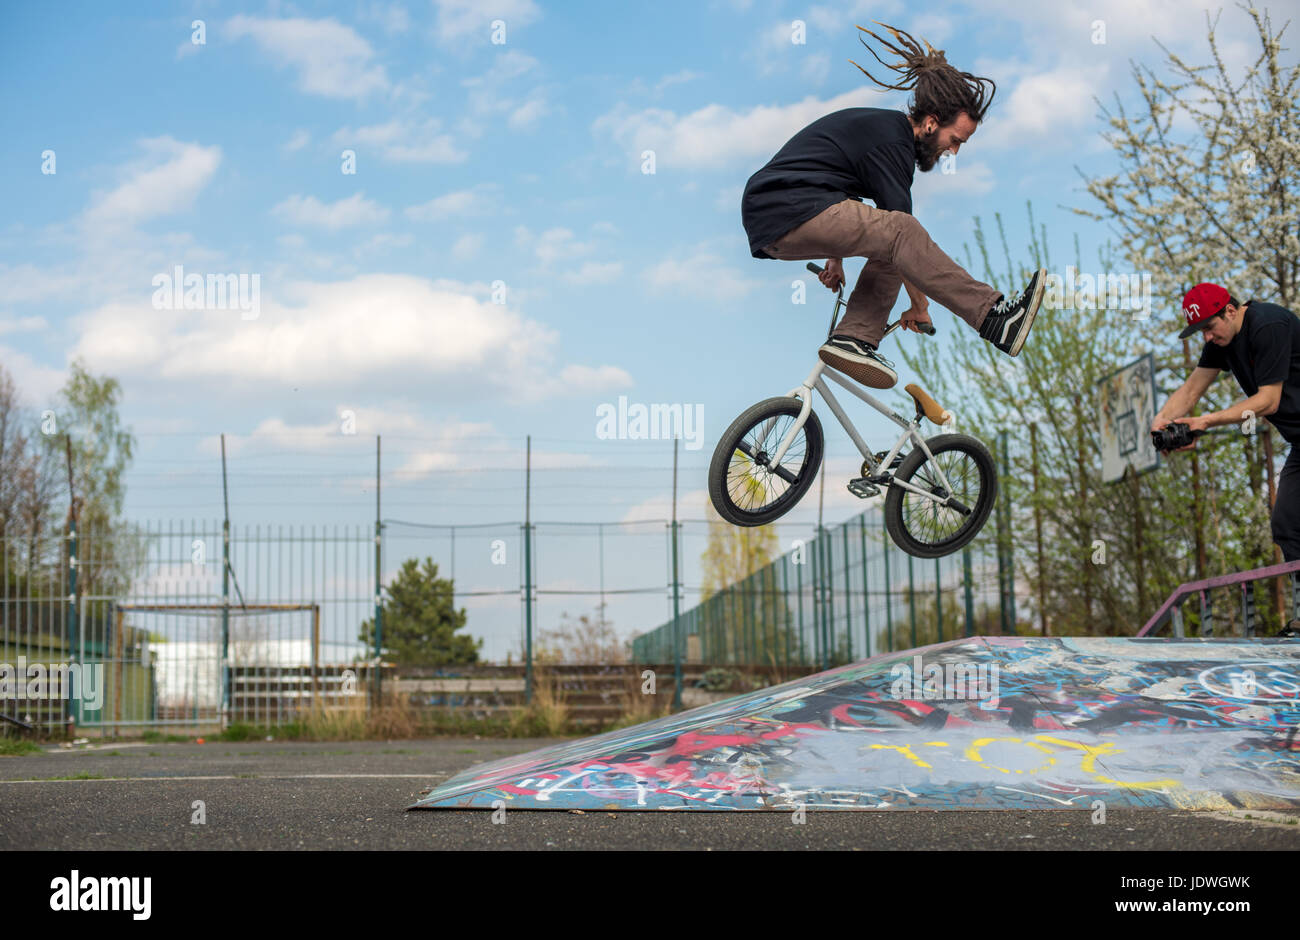 Dreadlock BMX rider performs tailwhip trick in the urban setting of Prague, Czech Republic. Graffiti and blue skies are clear to see. No logos. Stock Photo